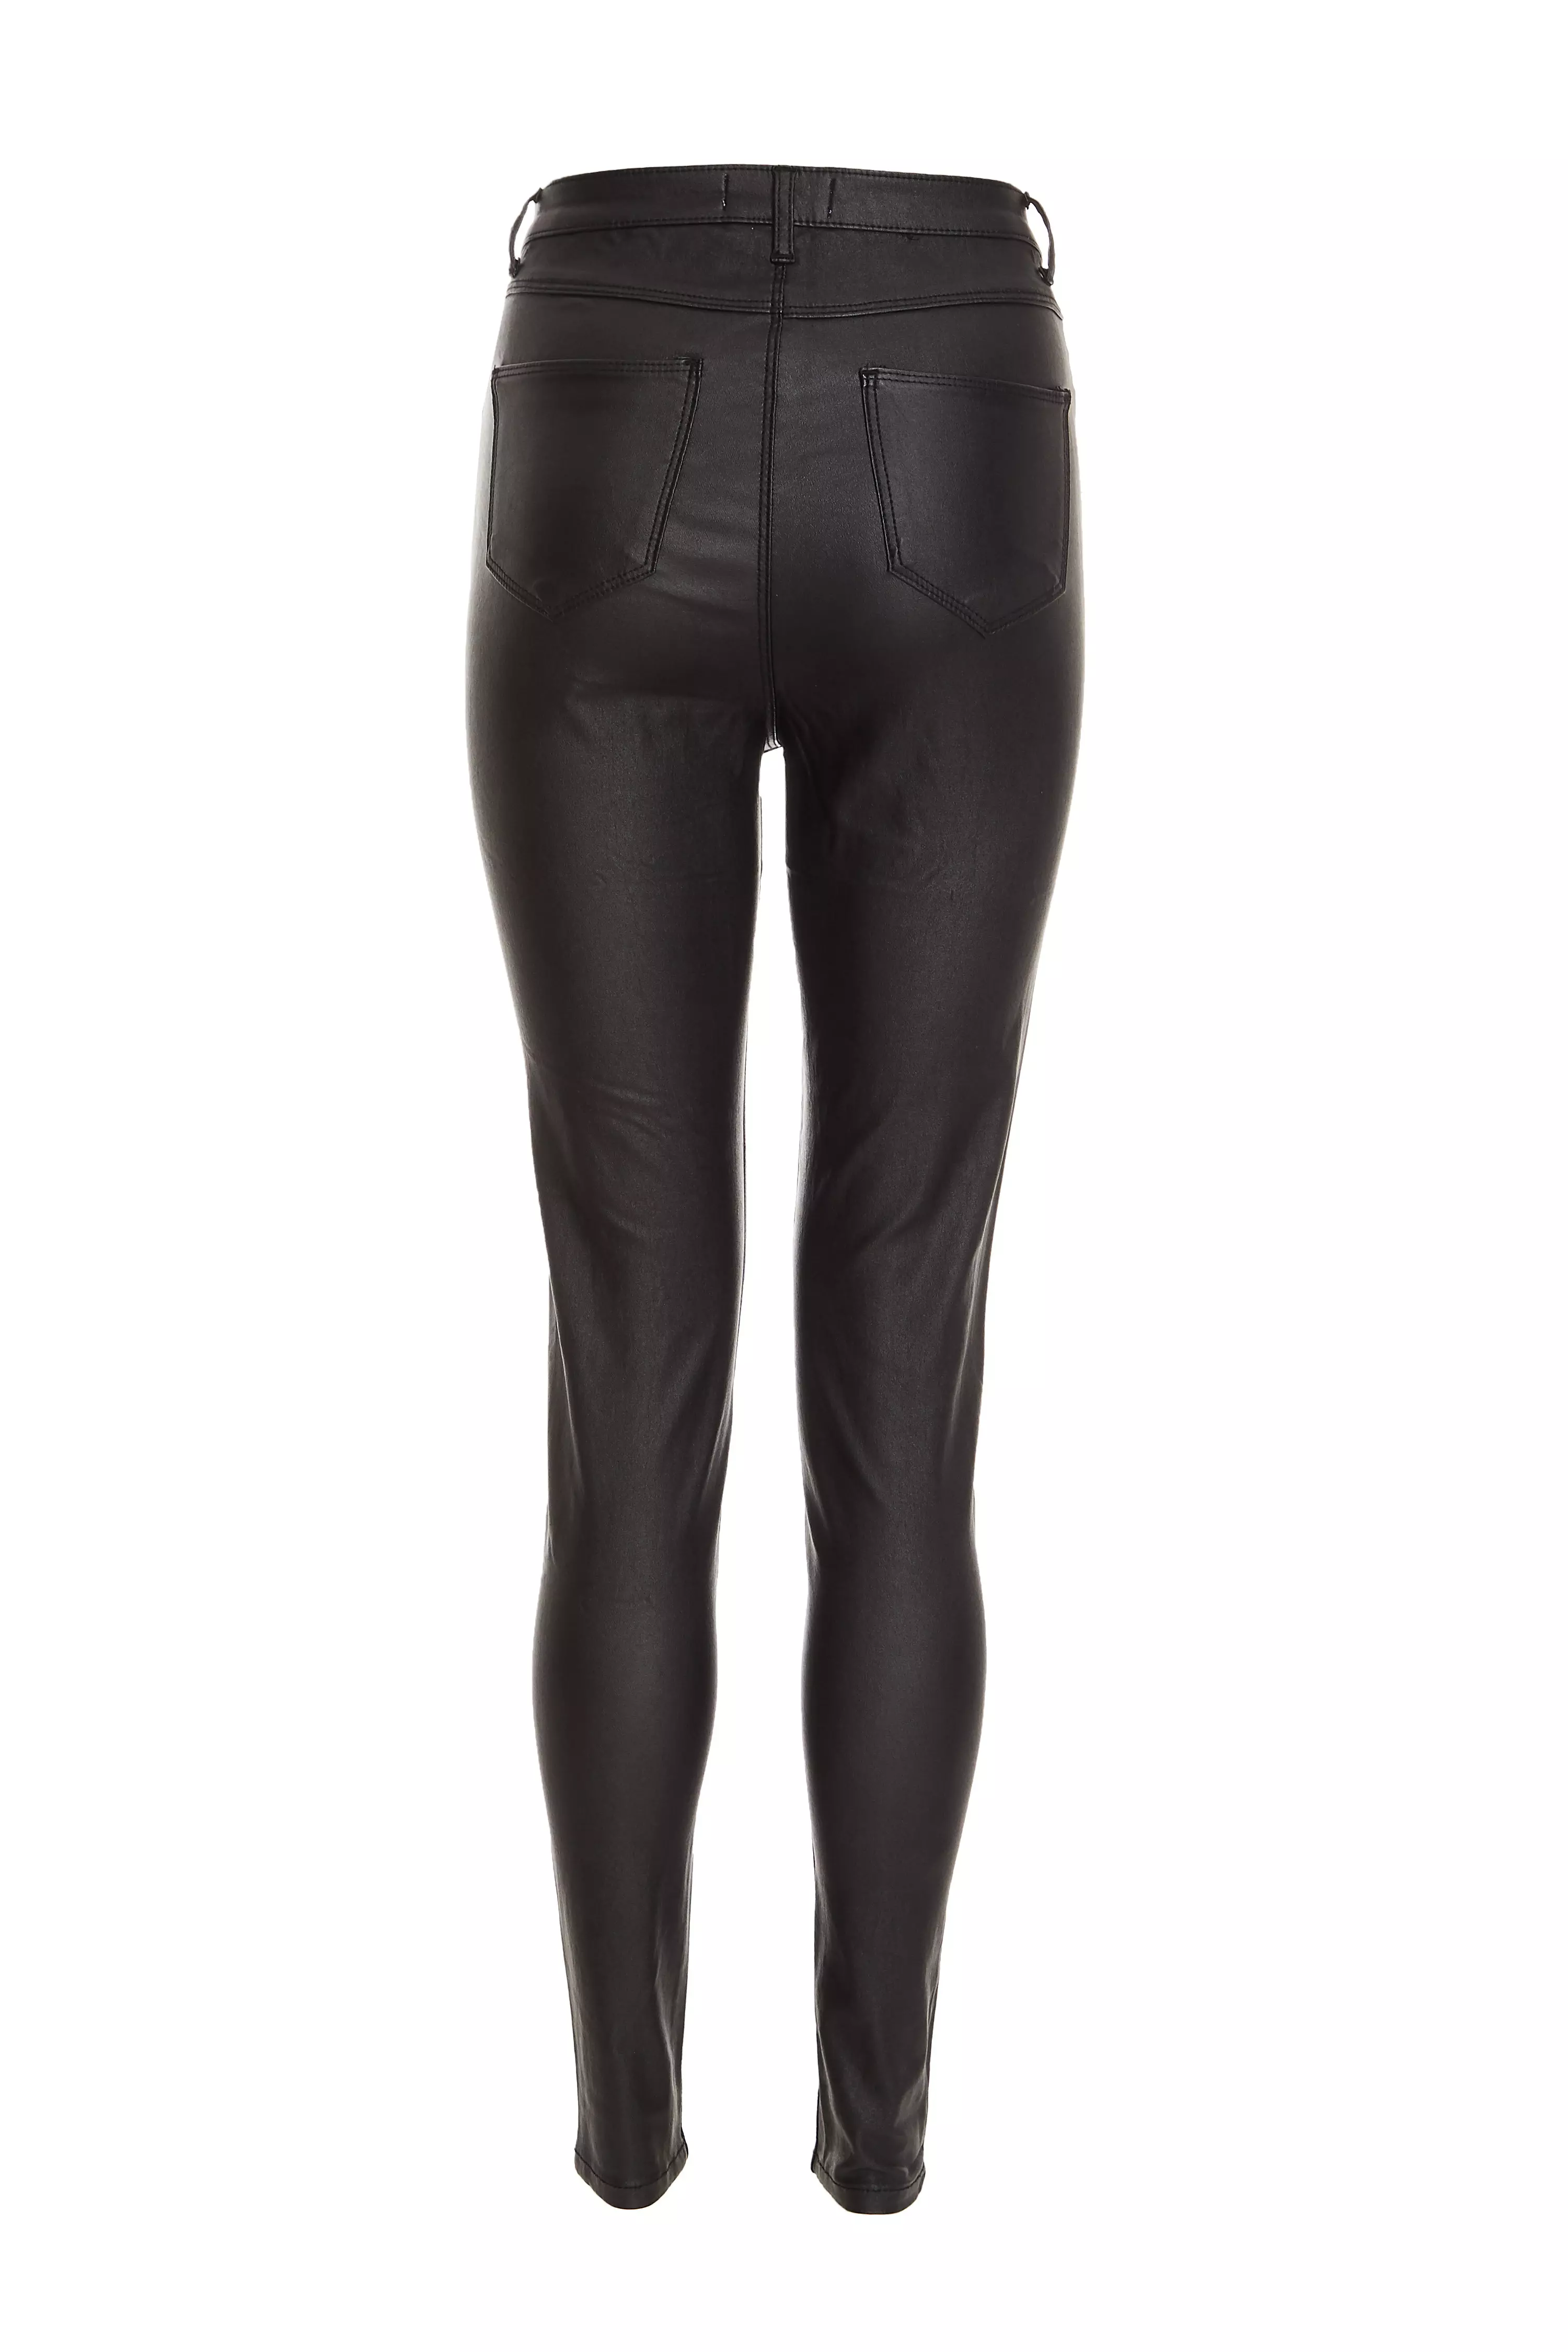 Black Faux Leather Skinny Jeans - QUIZ Clothing